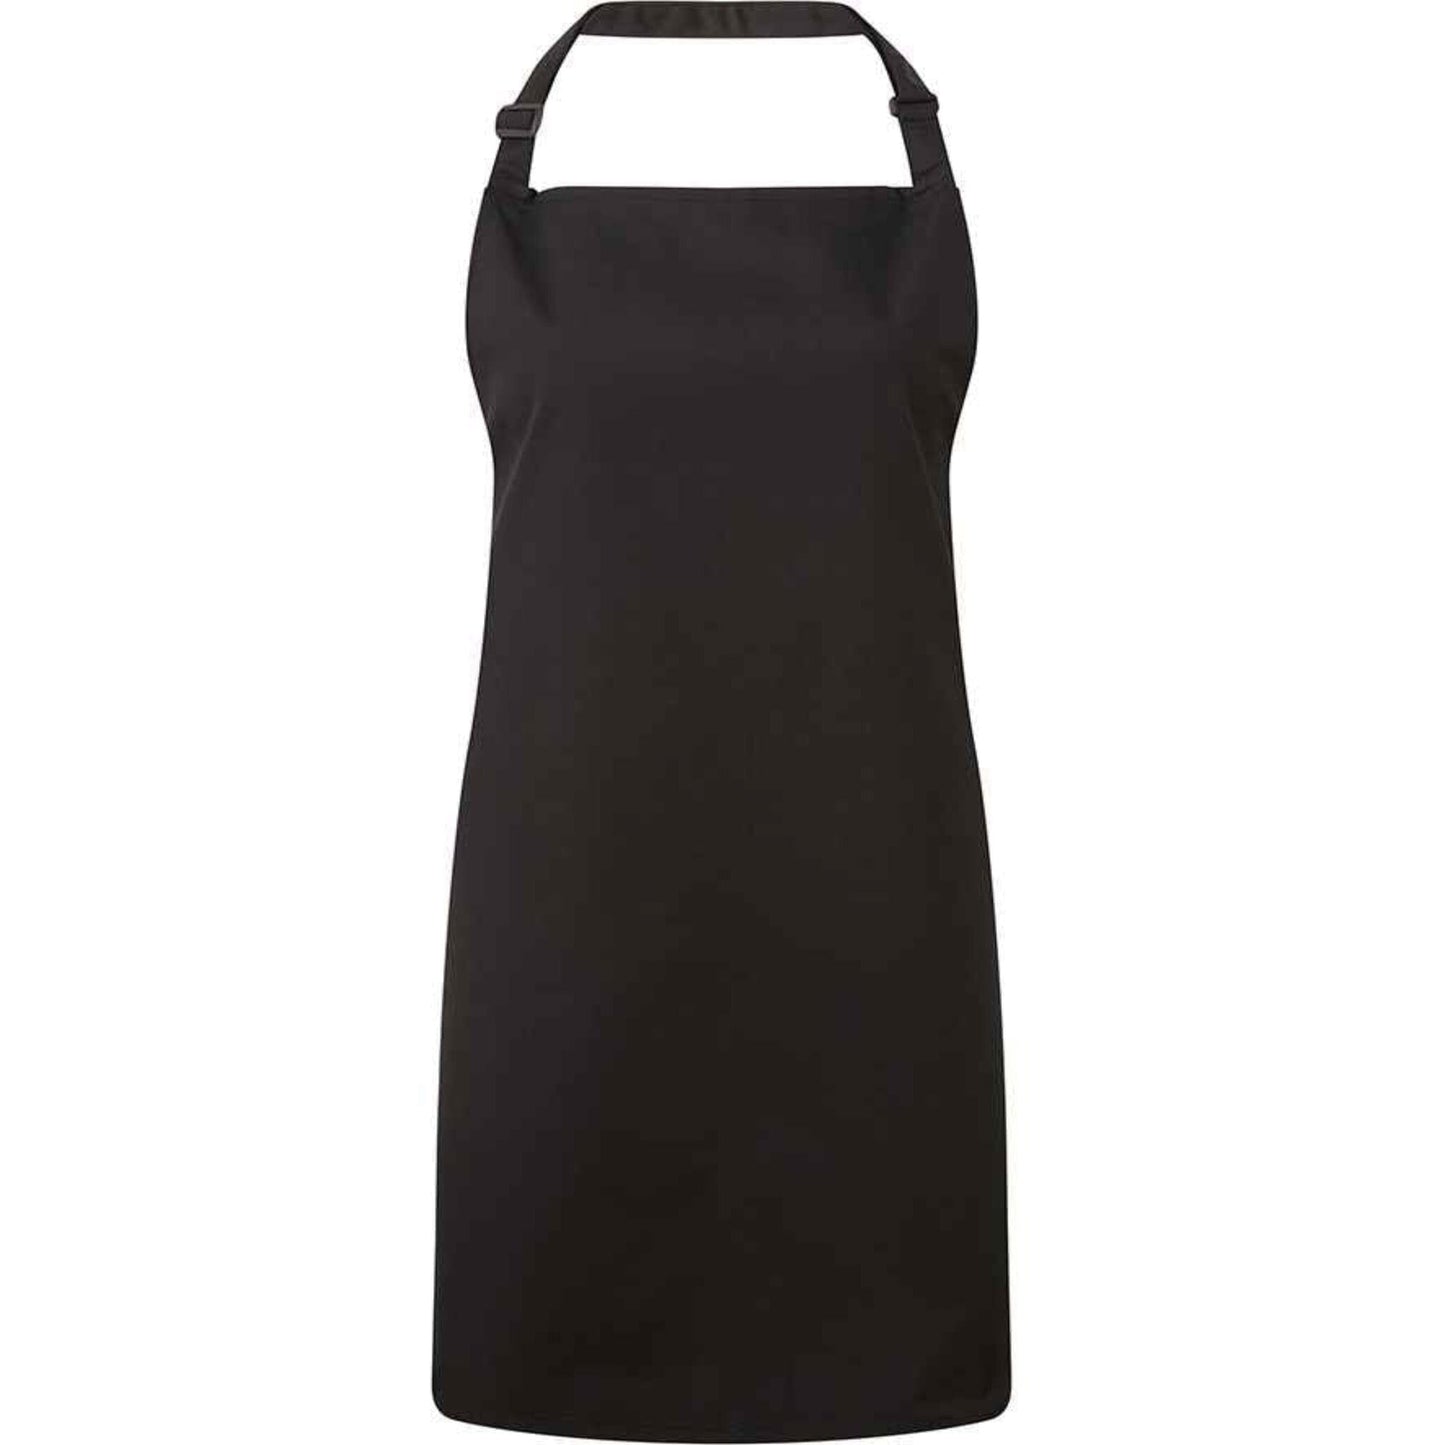 Personalised Apron with your Text